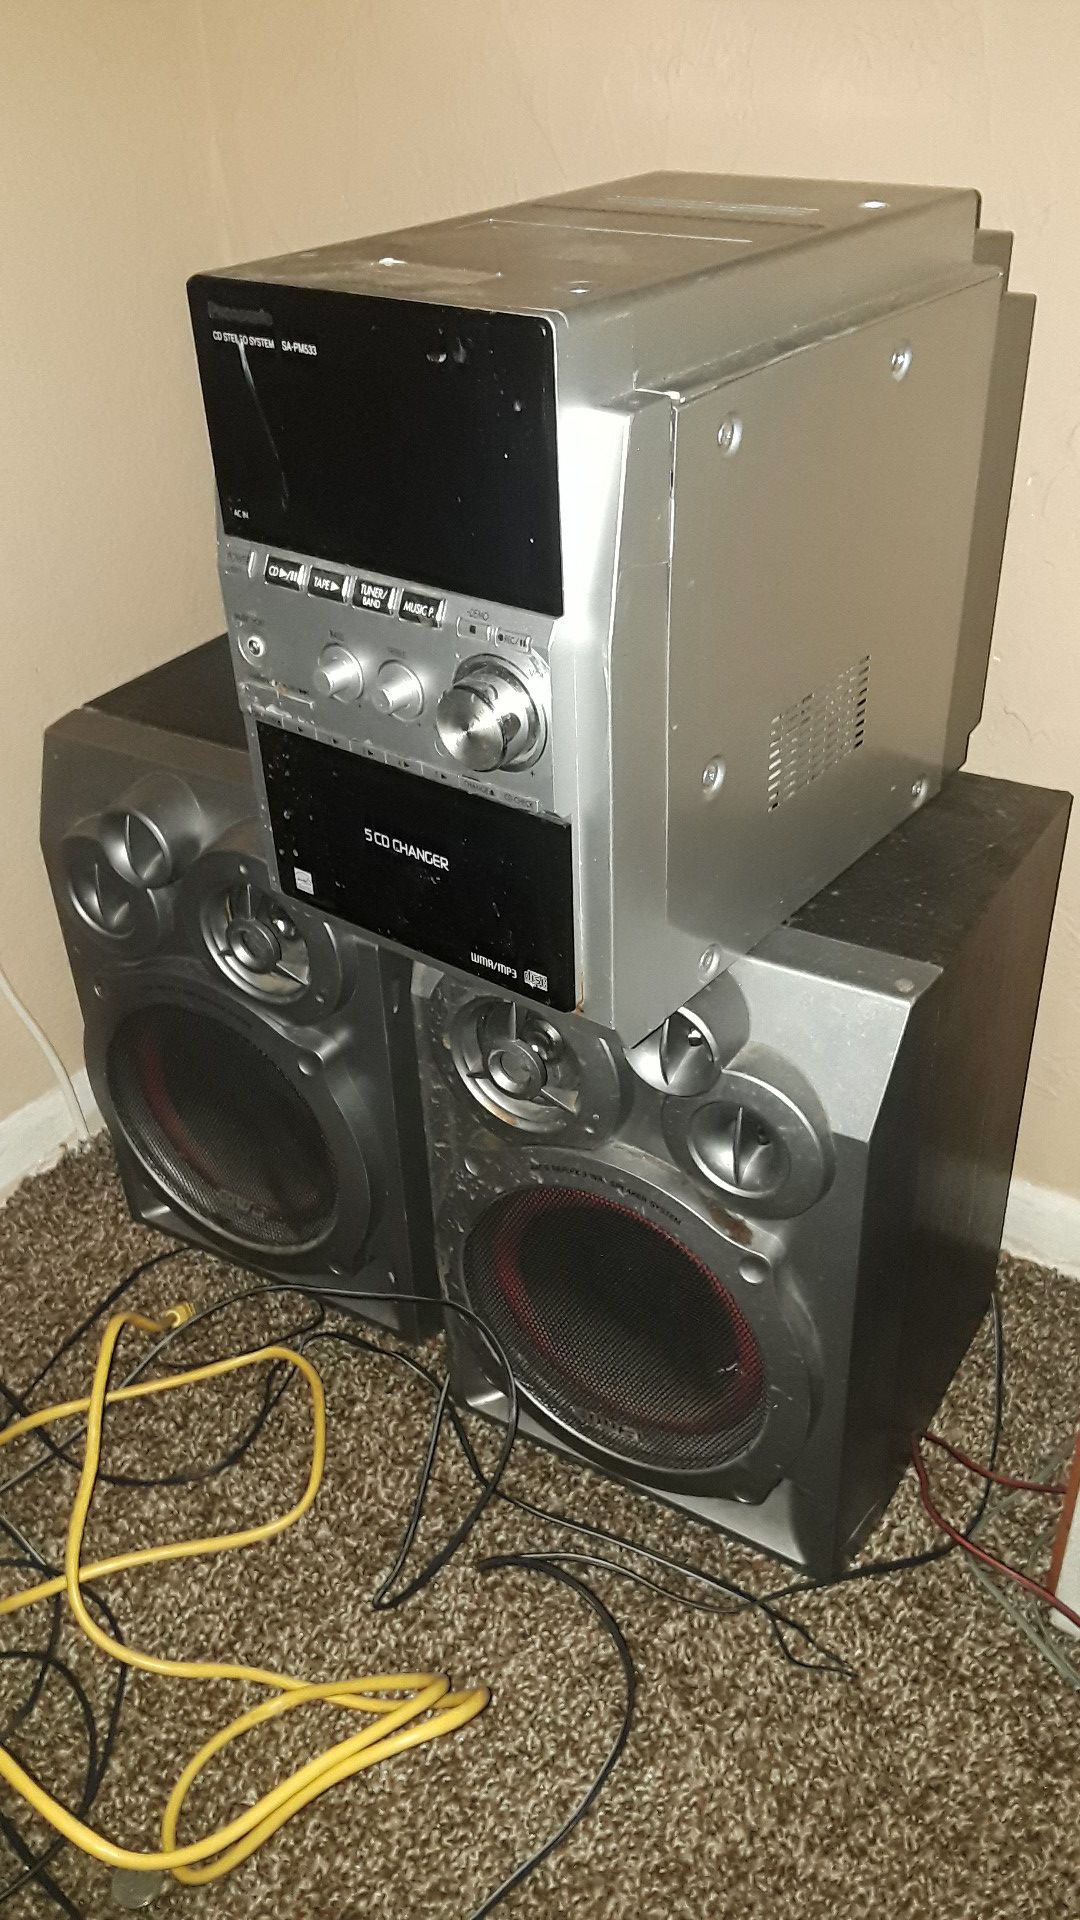 Older stereo system sounds great will clean off and repost